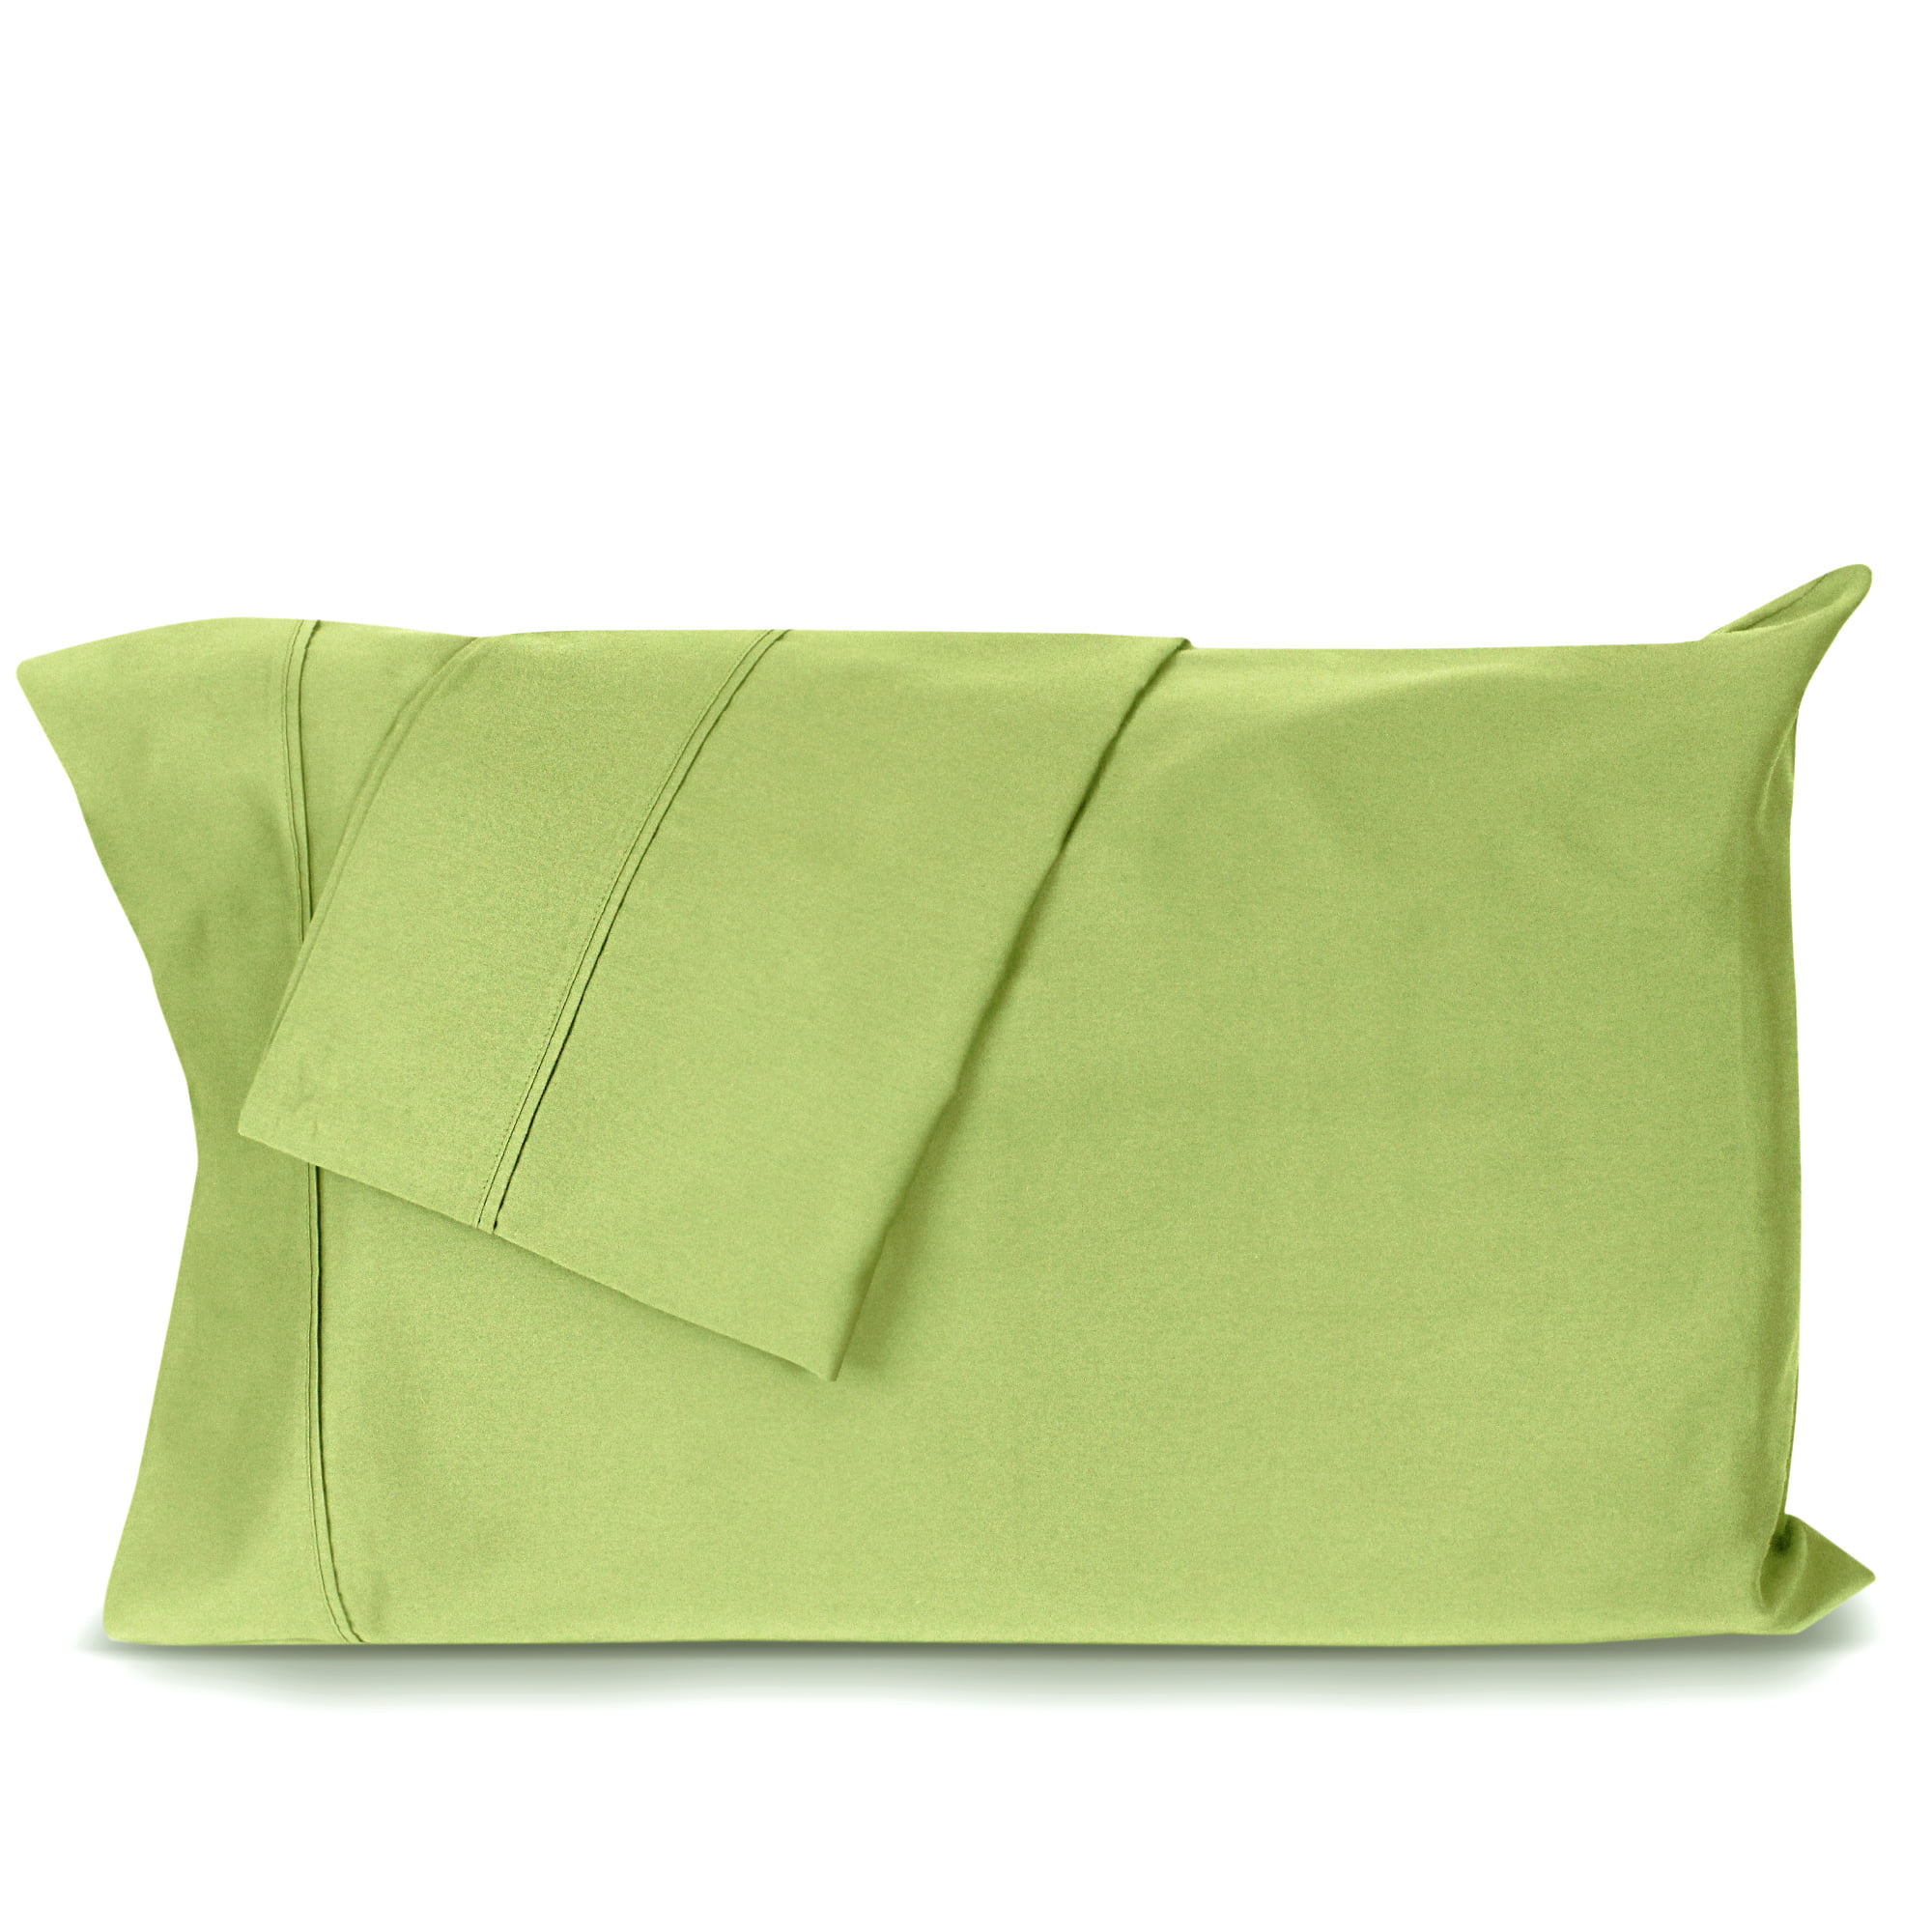 Details about    New Pillowcases Sale 100% Cotton Hotel Luxury Quality Pillowcases for Sleeping 